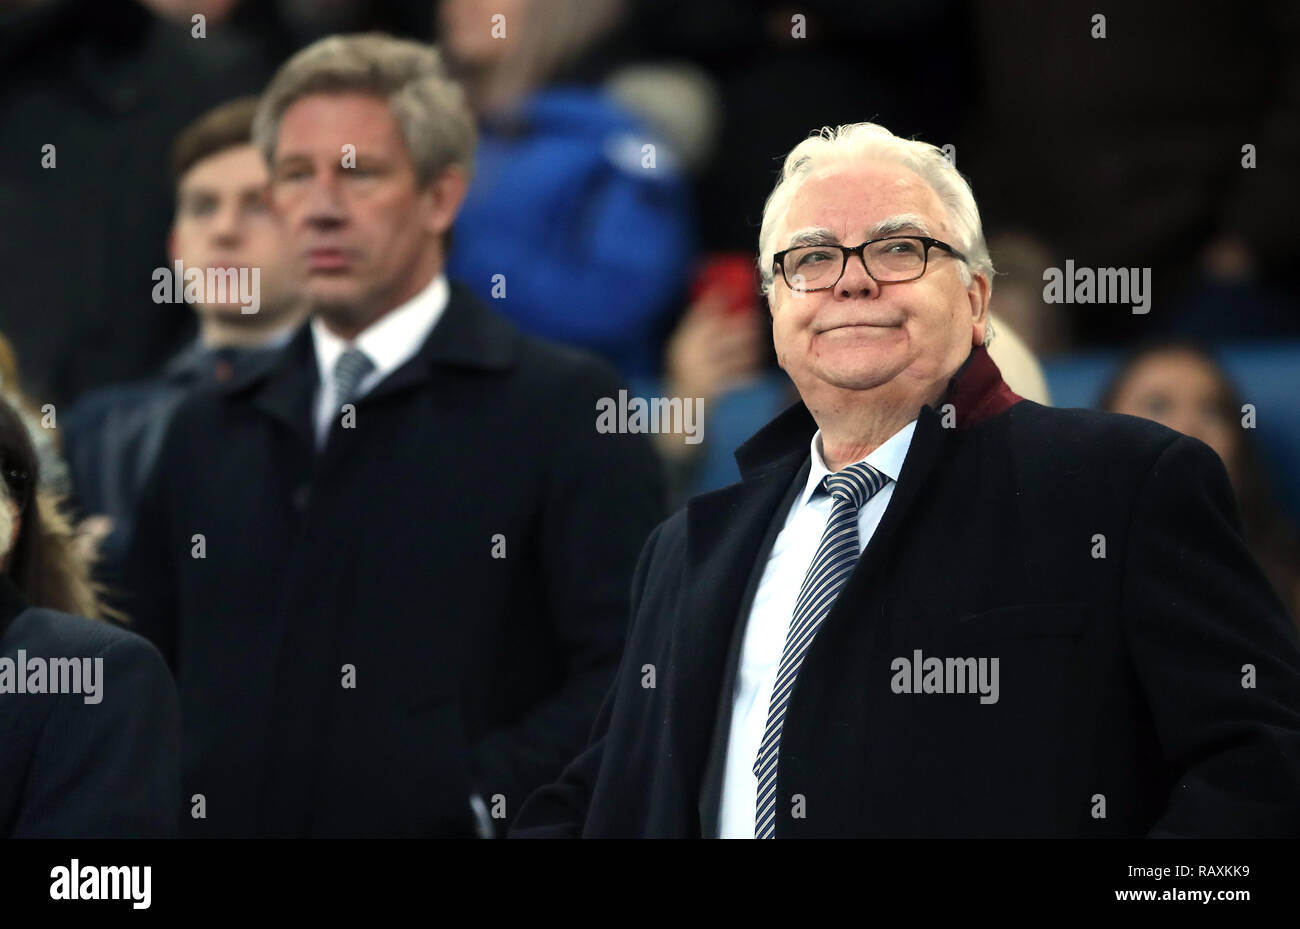 Everton chairman Bill Kenwright (right) and director of football Marcel Brands (left) during the Emirates FA Cup, third round match at Goodison Park, Liverpool. Stock Photo